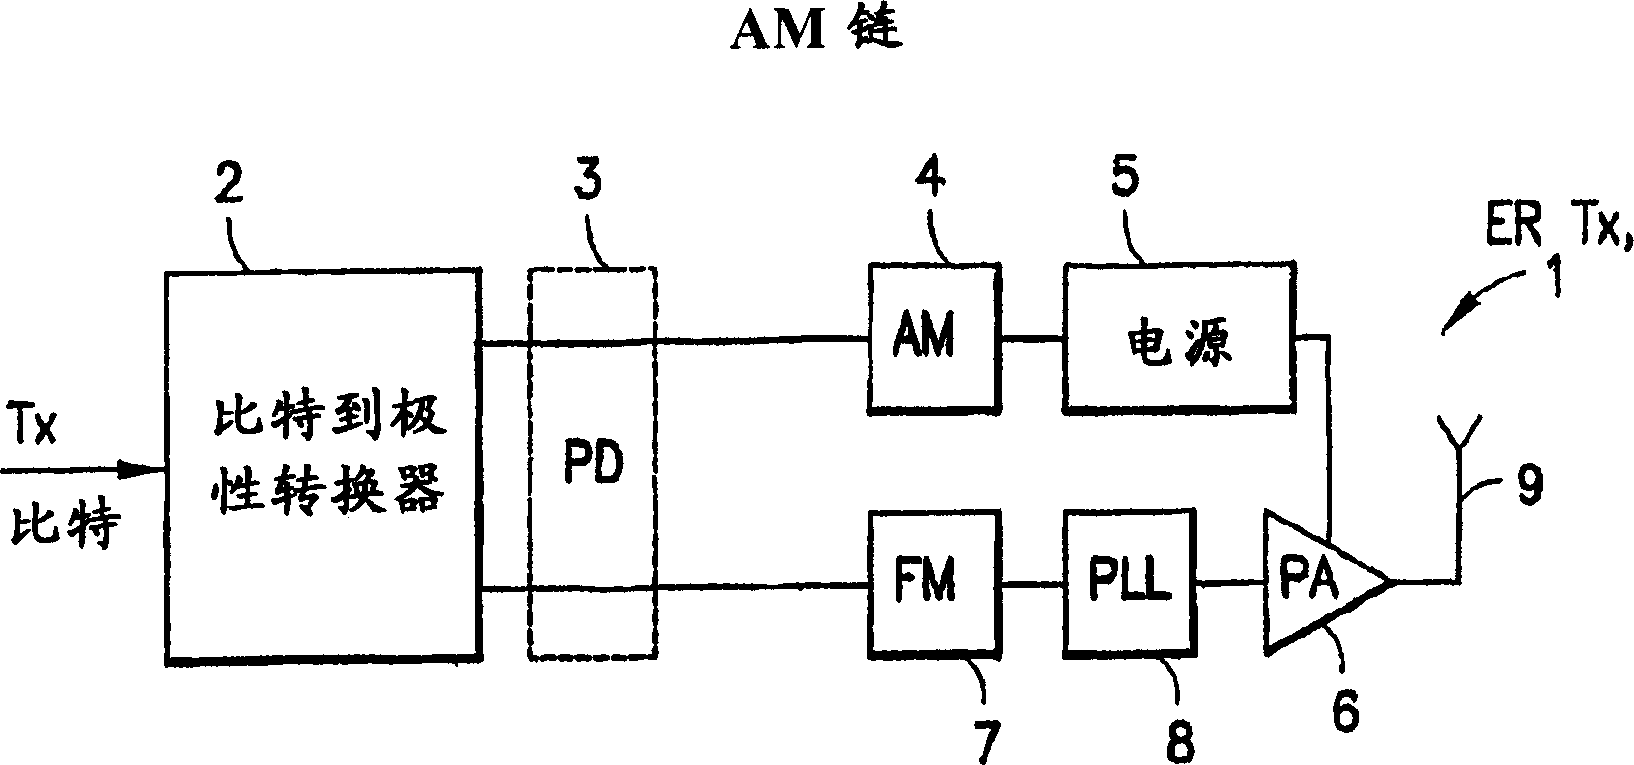 Hybrid switched mode/linear power amplifier power supply for use in polar transmitter